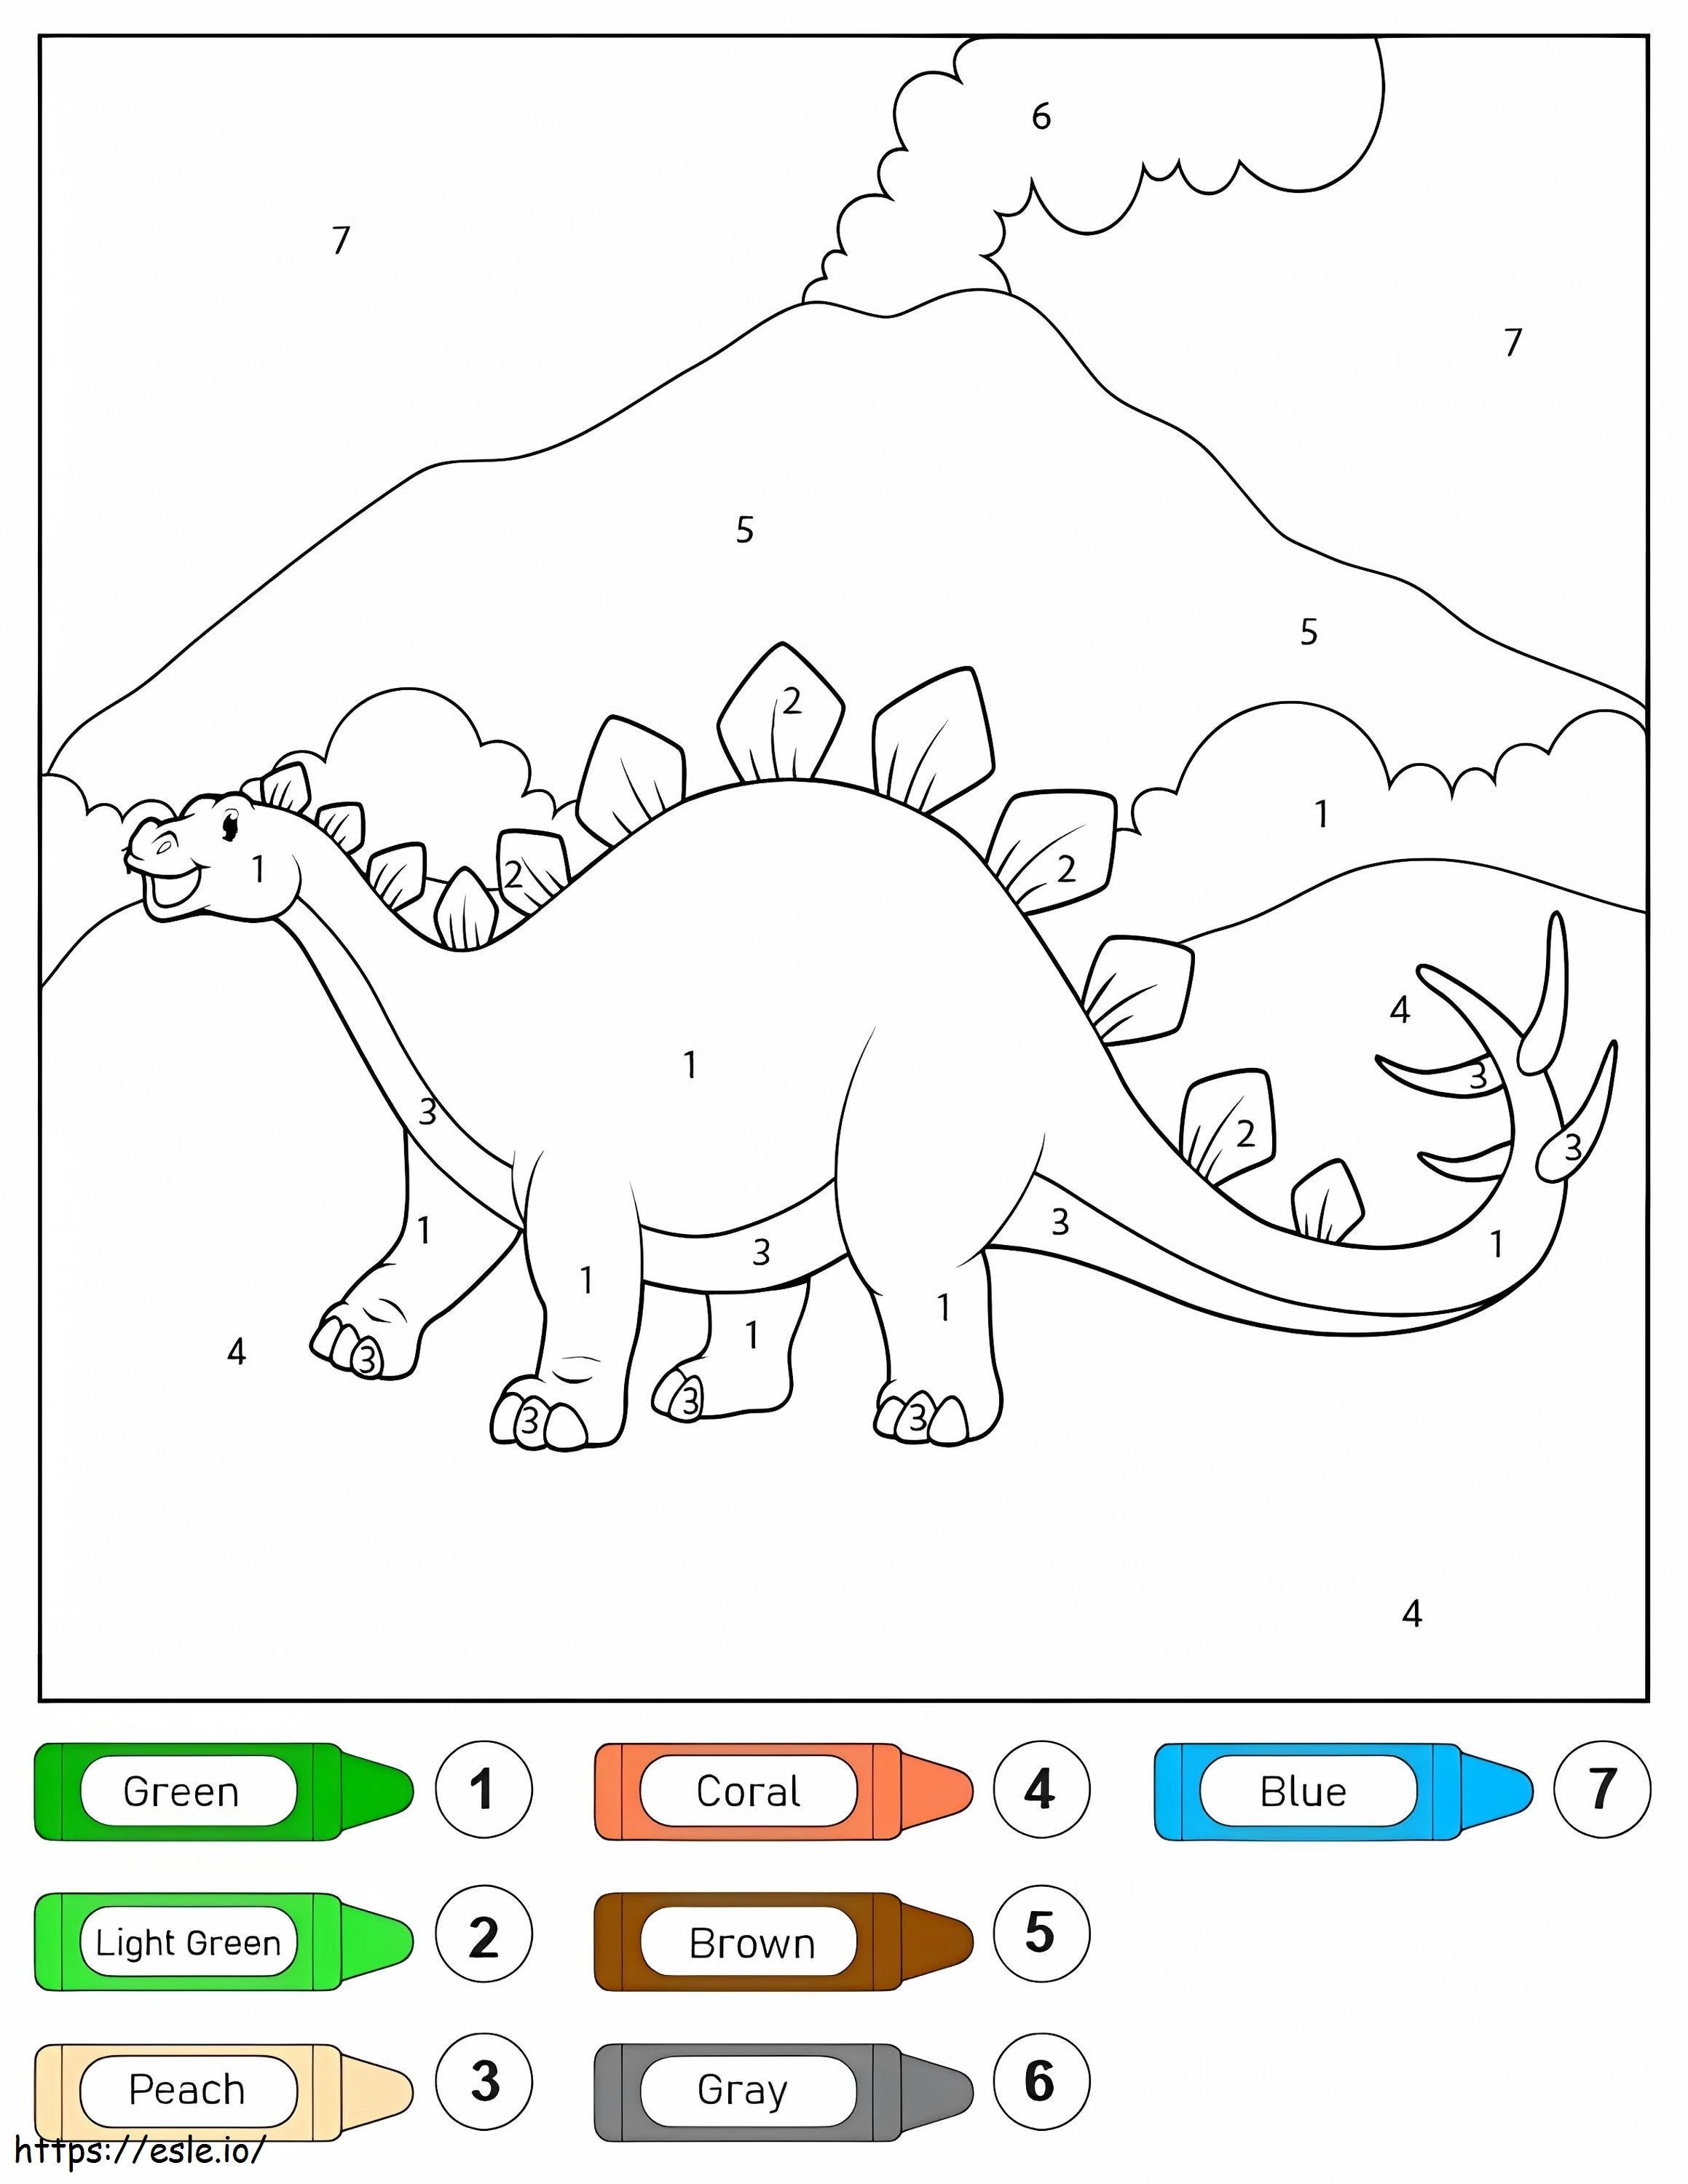 Stegosaurus Dinosaur Color By Number coloring page